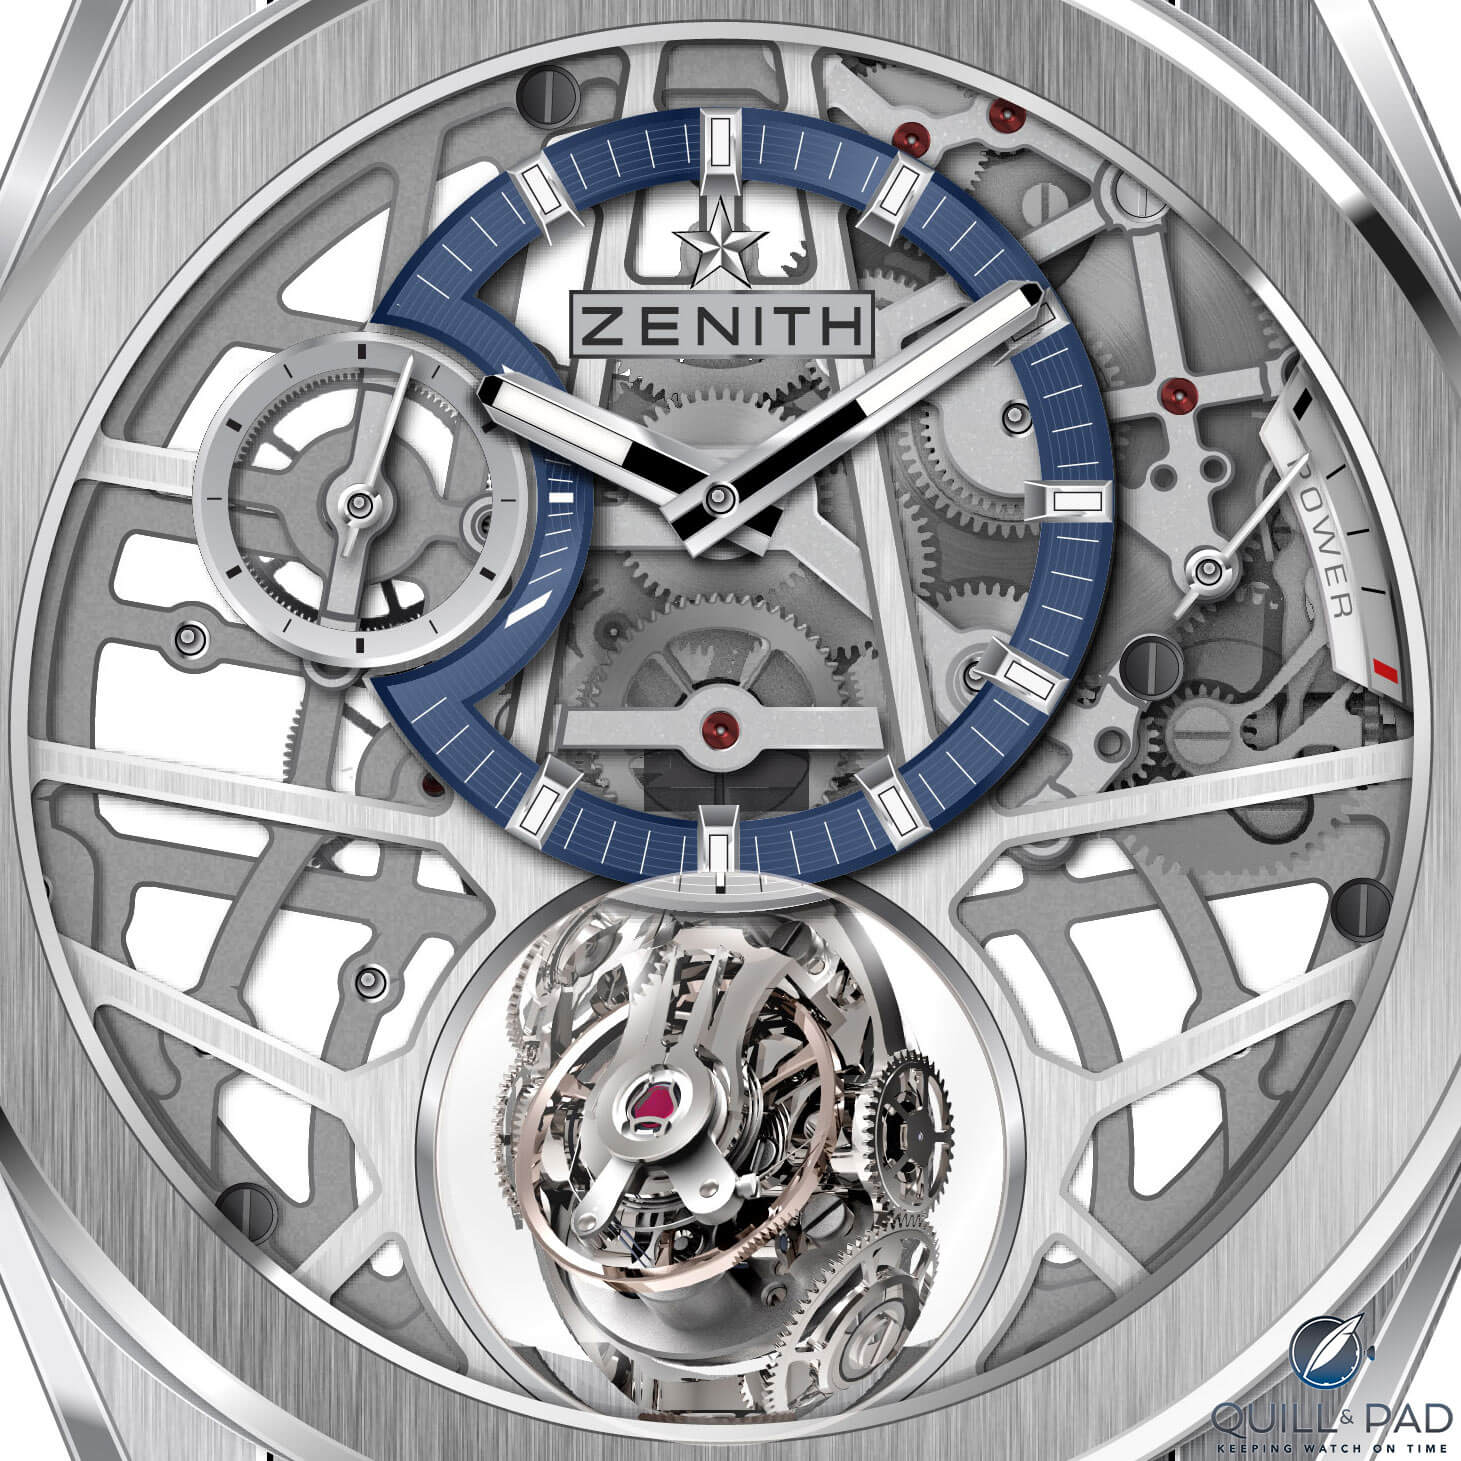 Close up look dial side of the Zenith Defy Zero G 